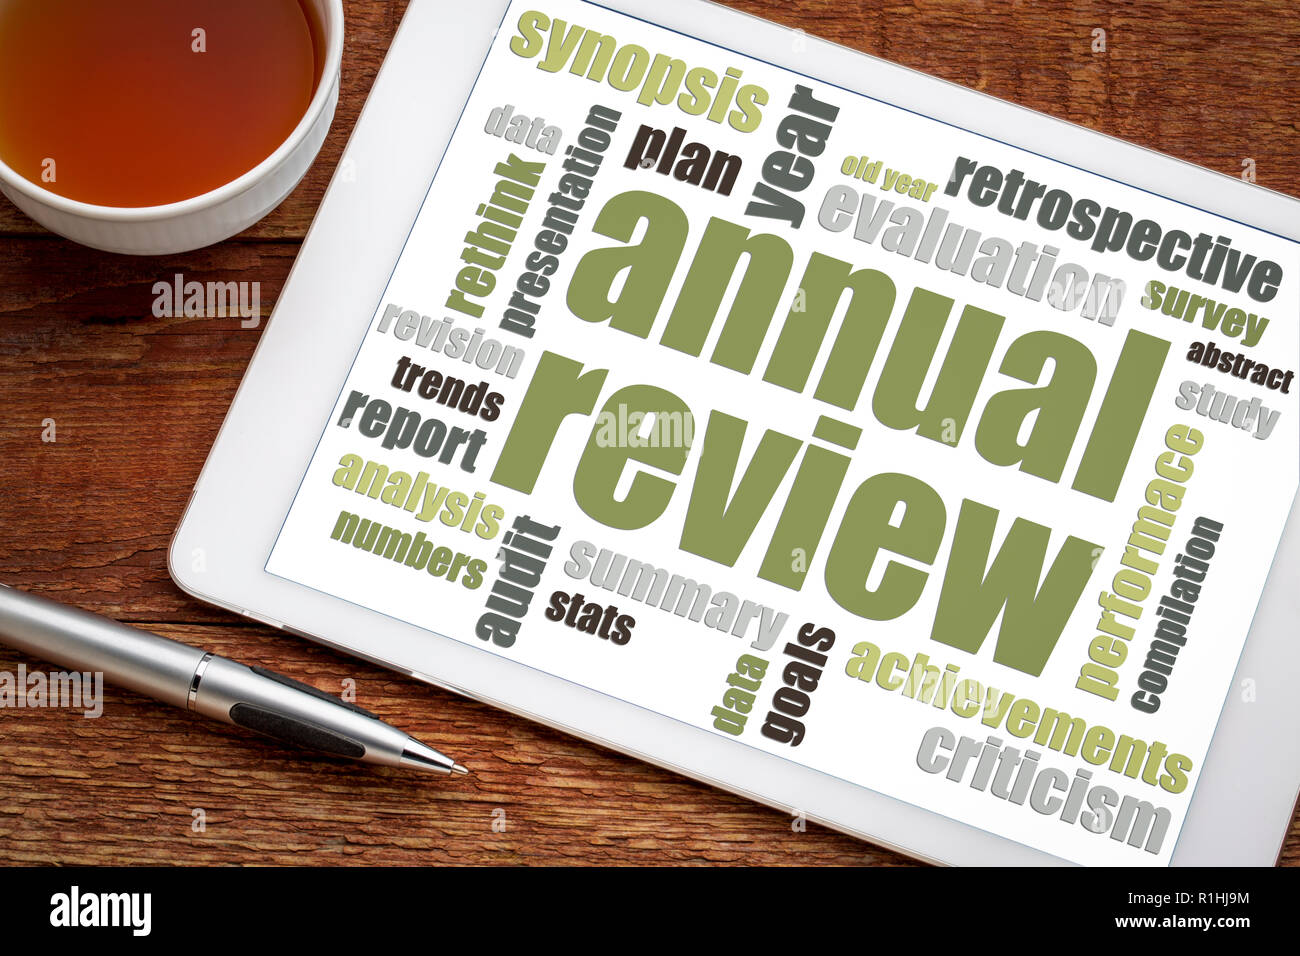 annual review word cloud on a digital  tablet with a cup of tea Stock Photo